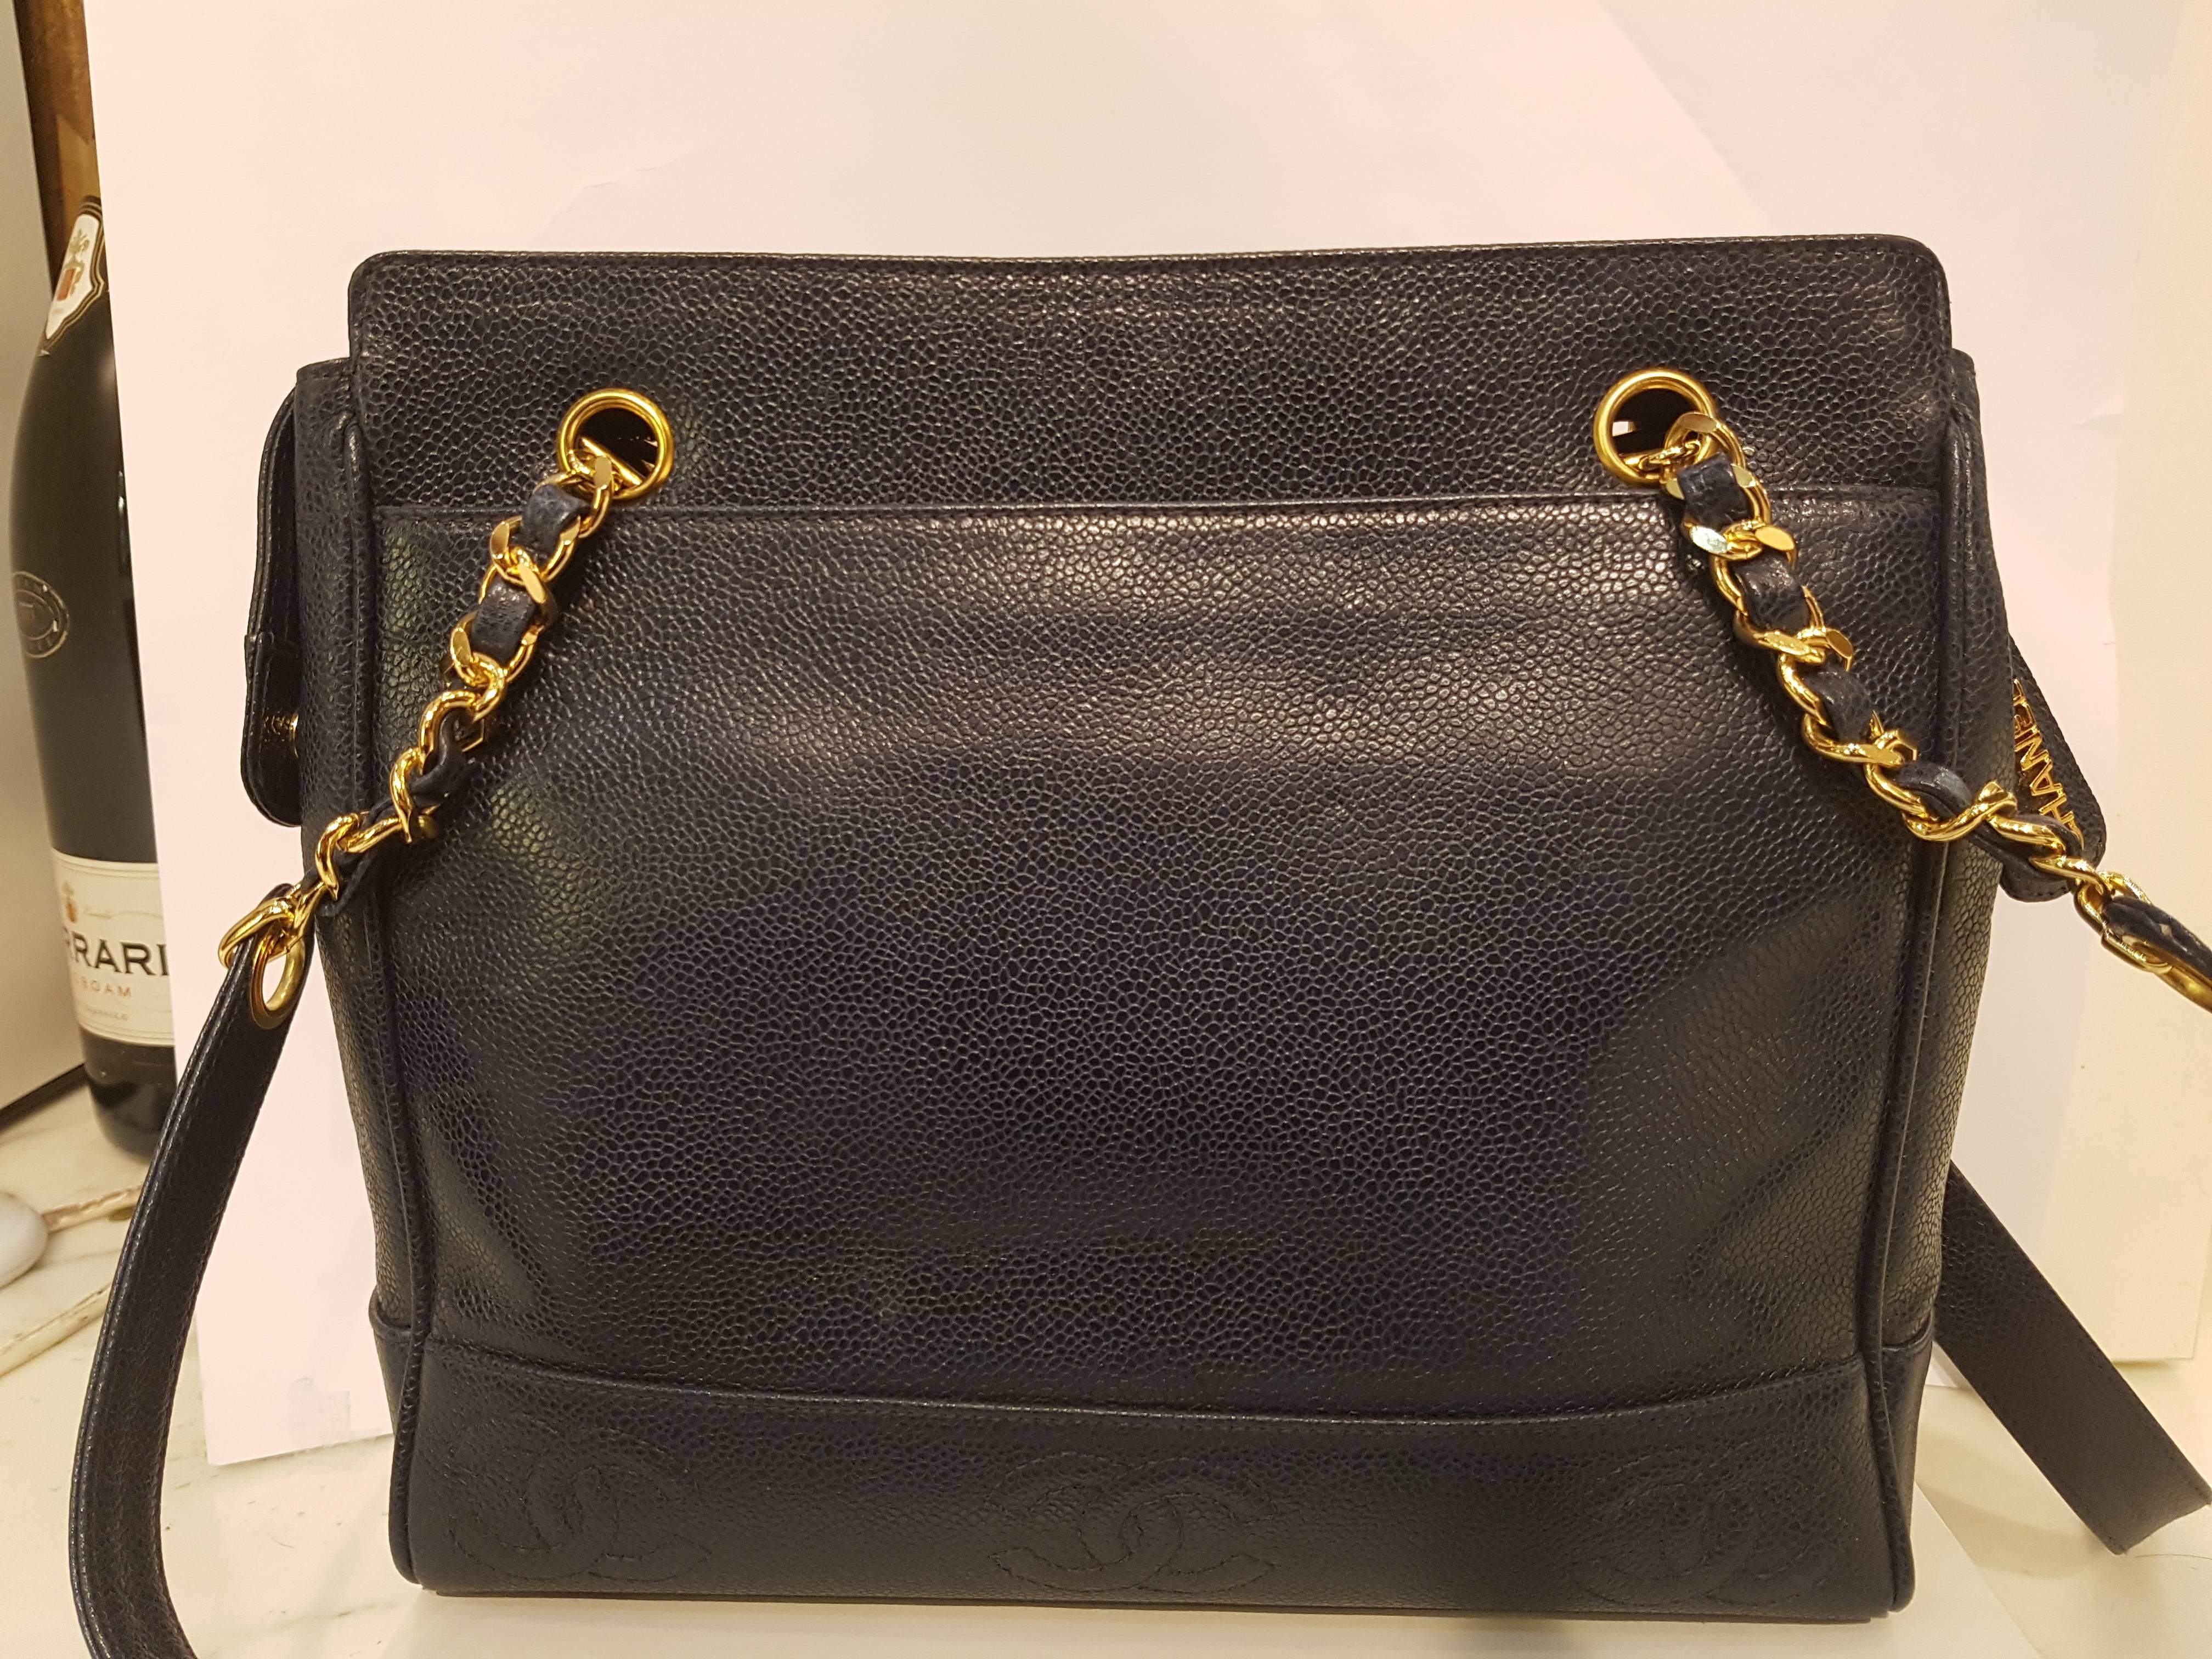 Chanel Blu Navy Caviar Leather double shoulder bag.
Shoulder Bag blu and gold tone chain
Shoulder bag lenght: 84cm
3 double CC on the down
1990s Circa
In perfect conditions still with card